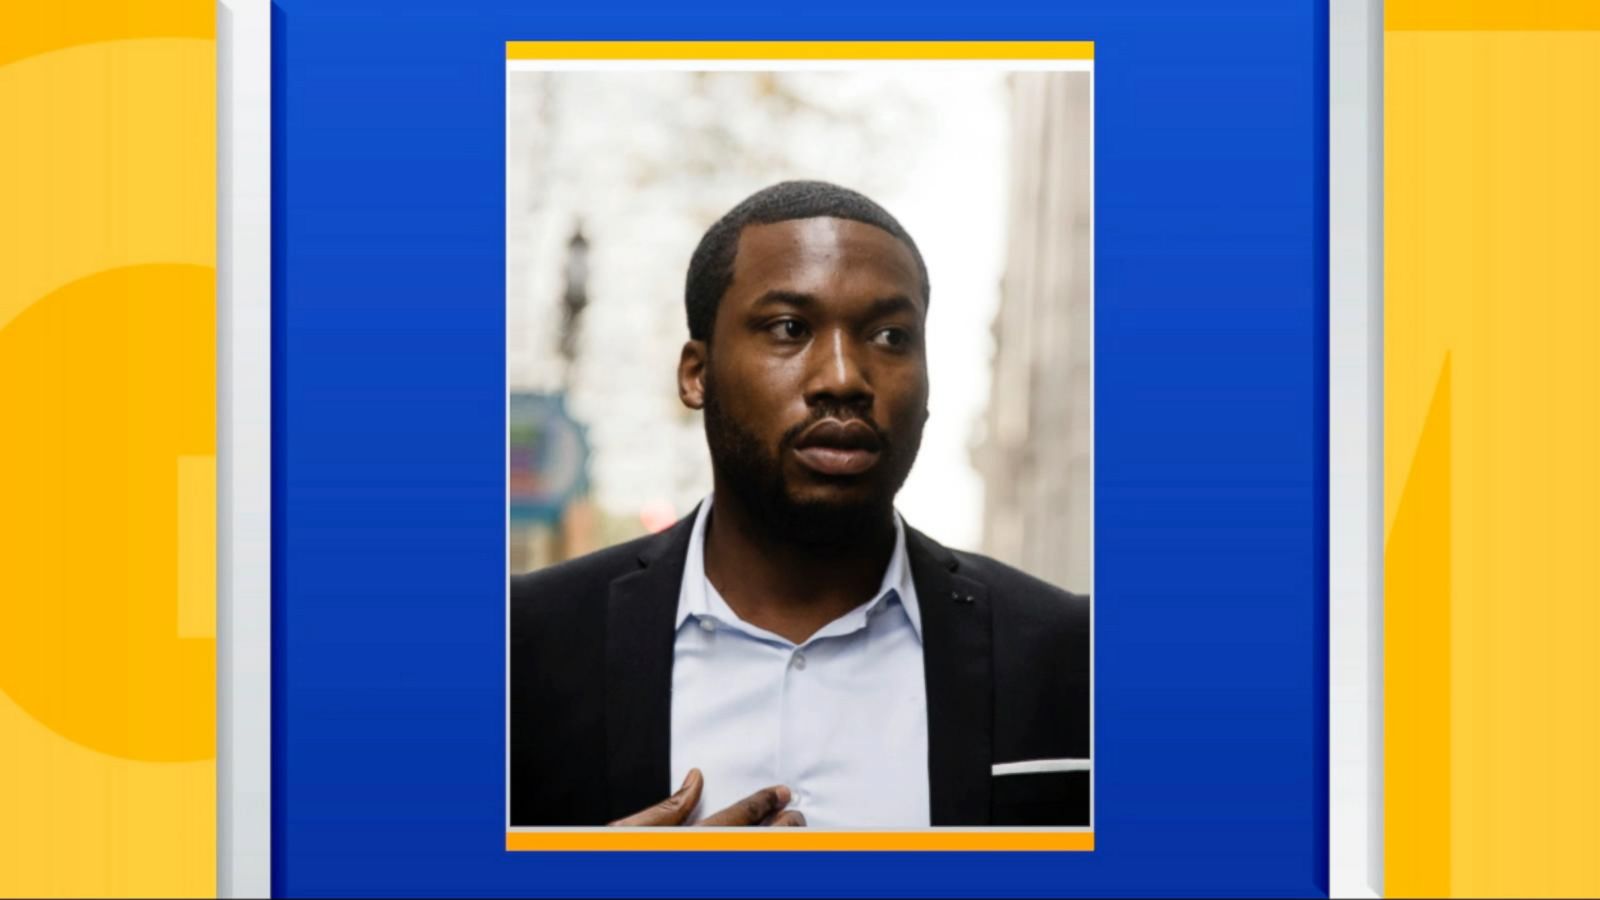 Why Meek Mill's Release From Prison Matters